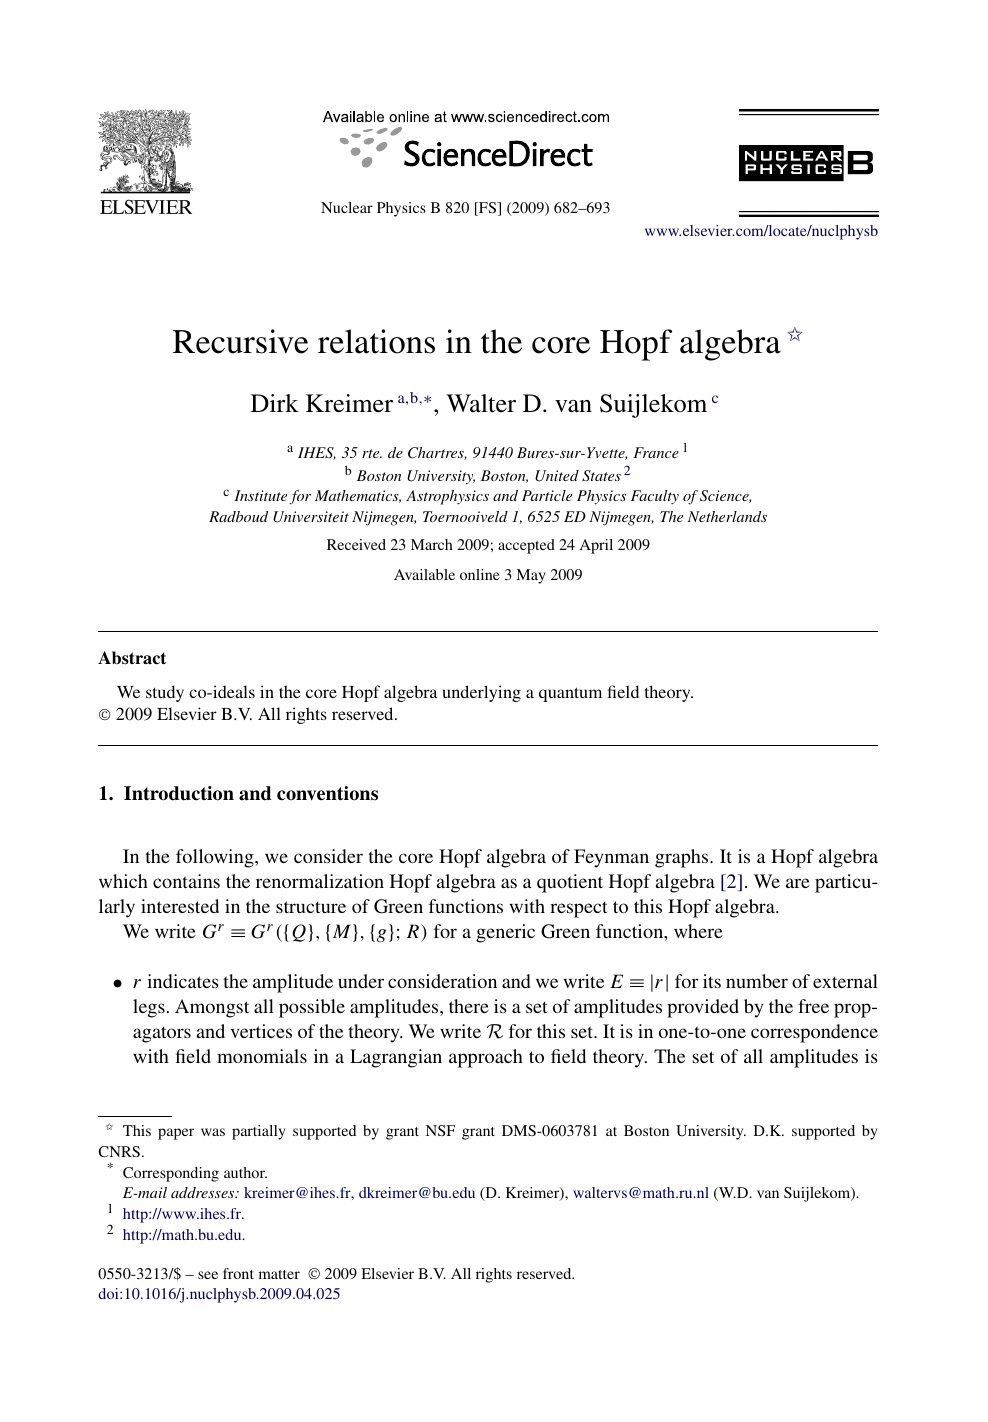 Recursive Relations In The Core Hopf Algebra Topic Of Research Paper In Physical Sciences Download Scholarly Article Pdf And Read For Free On Cyberleninka Open Science Hub